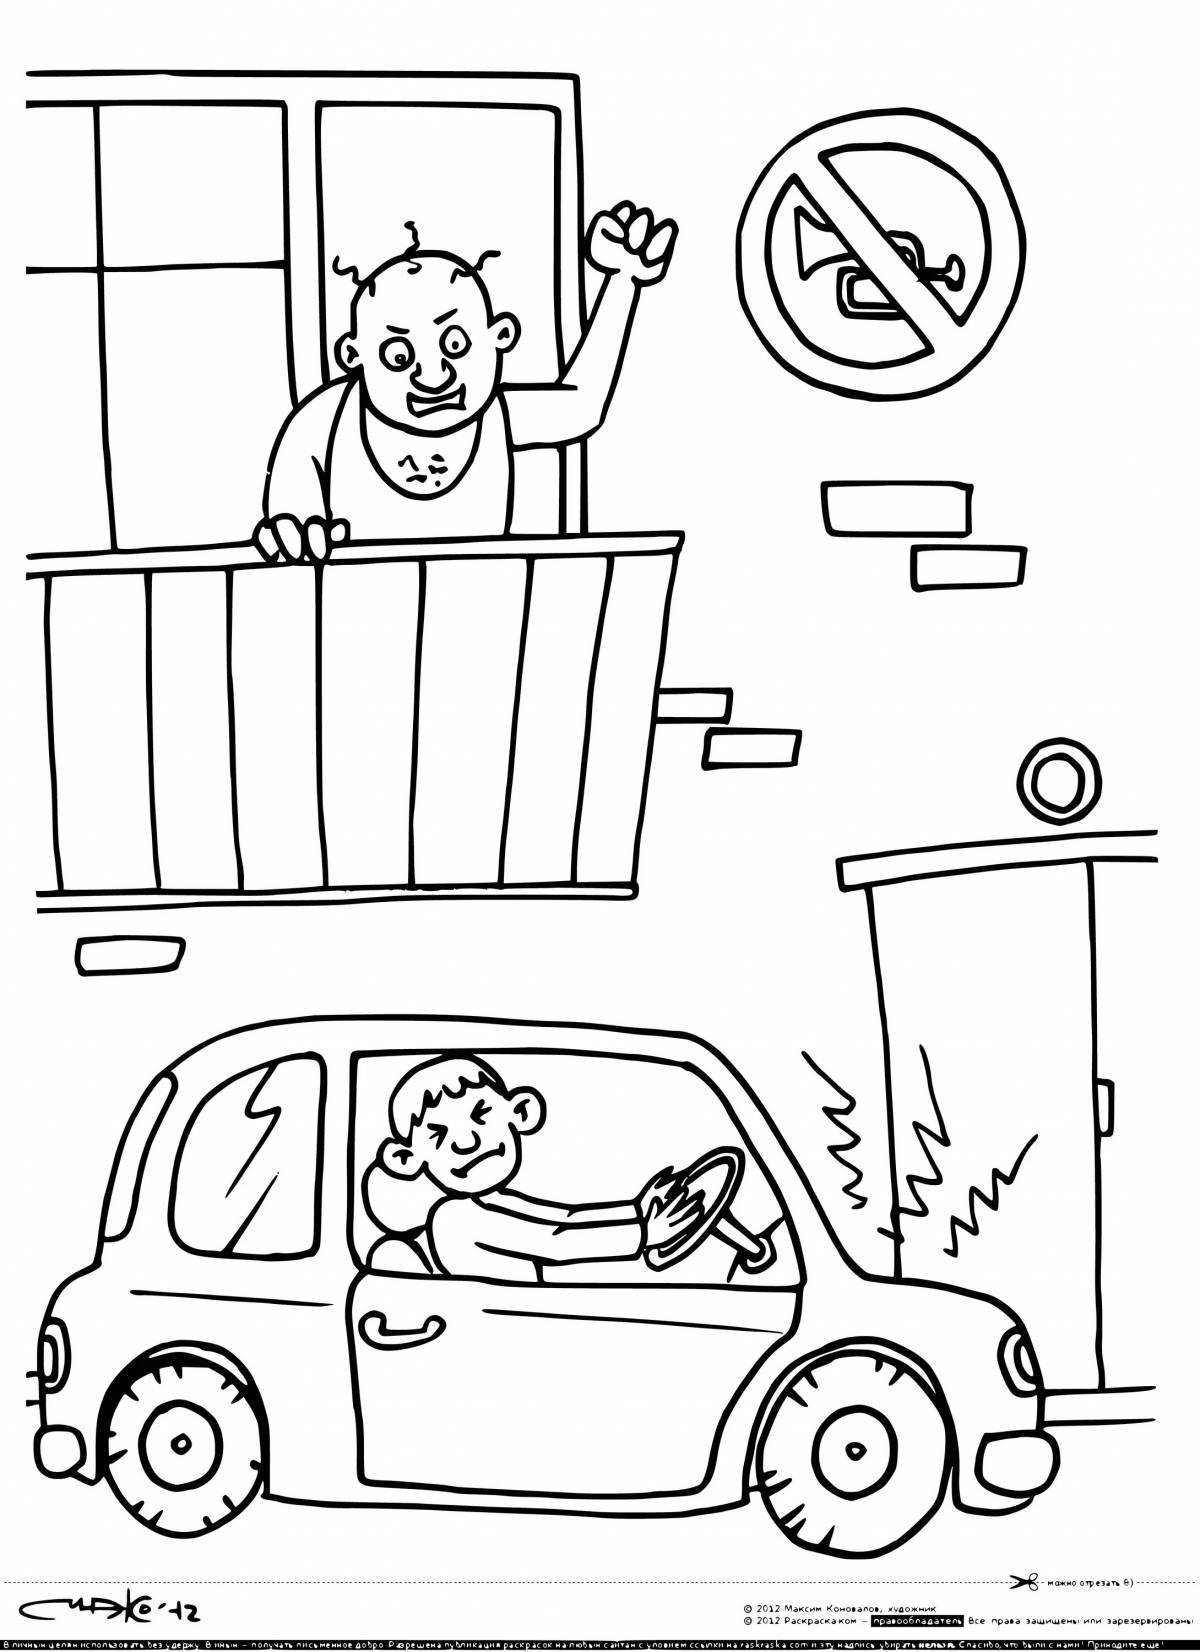 Funny traffic safety coloring page